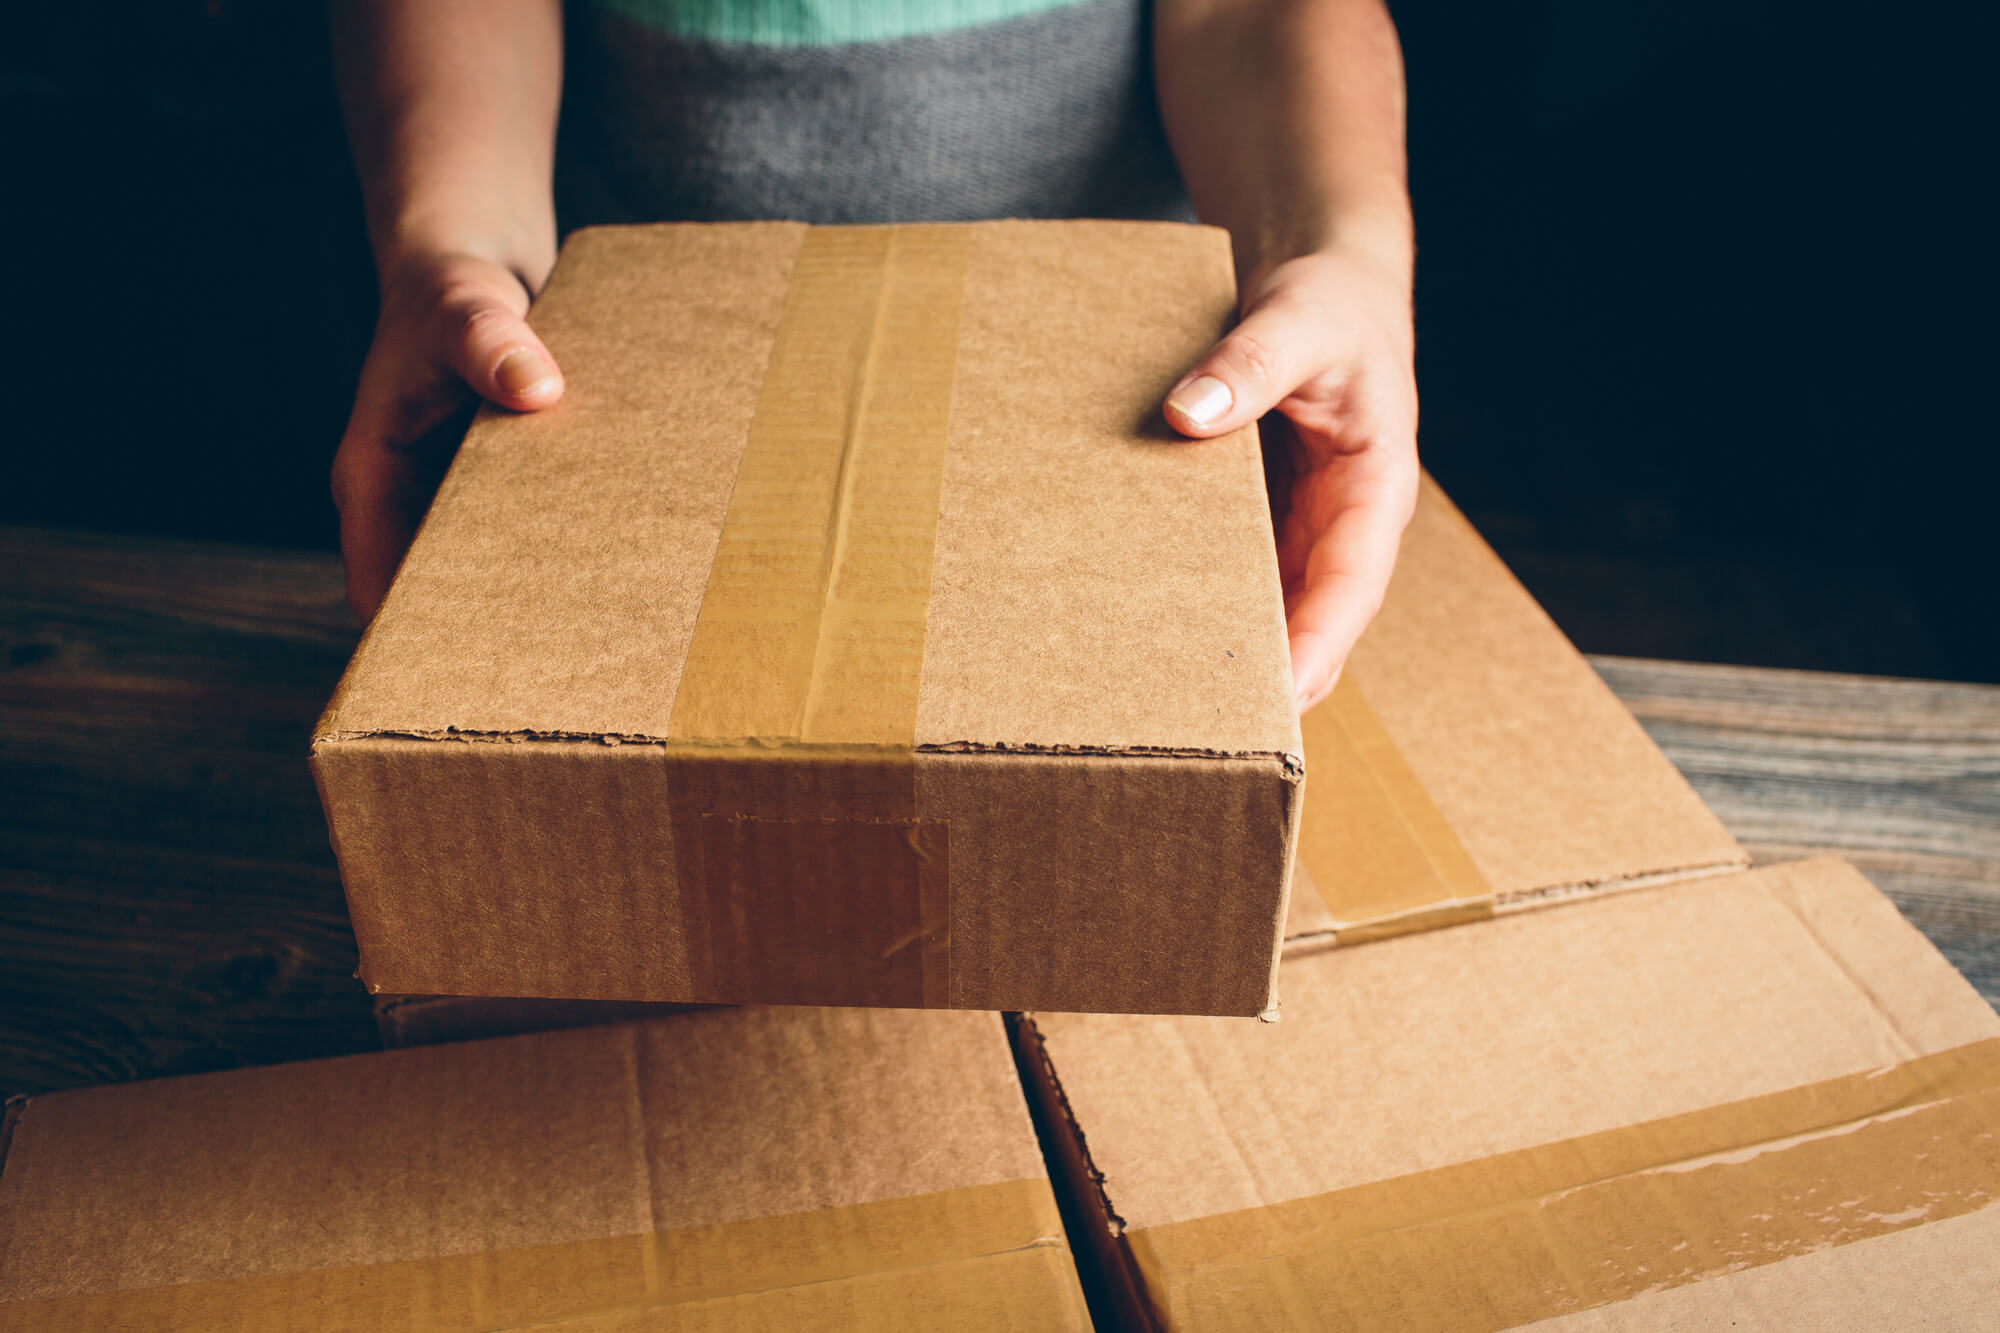 7 Key Benefits of Working With an Experienced Co-Packer